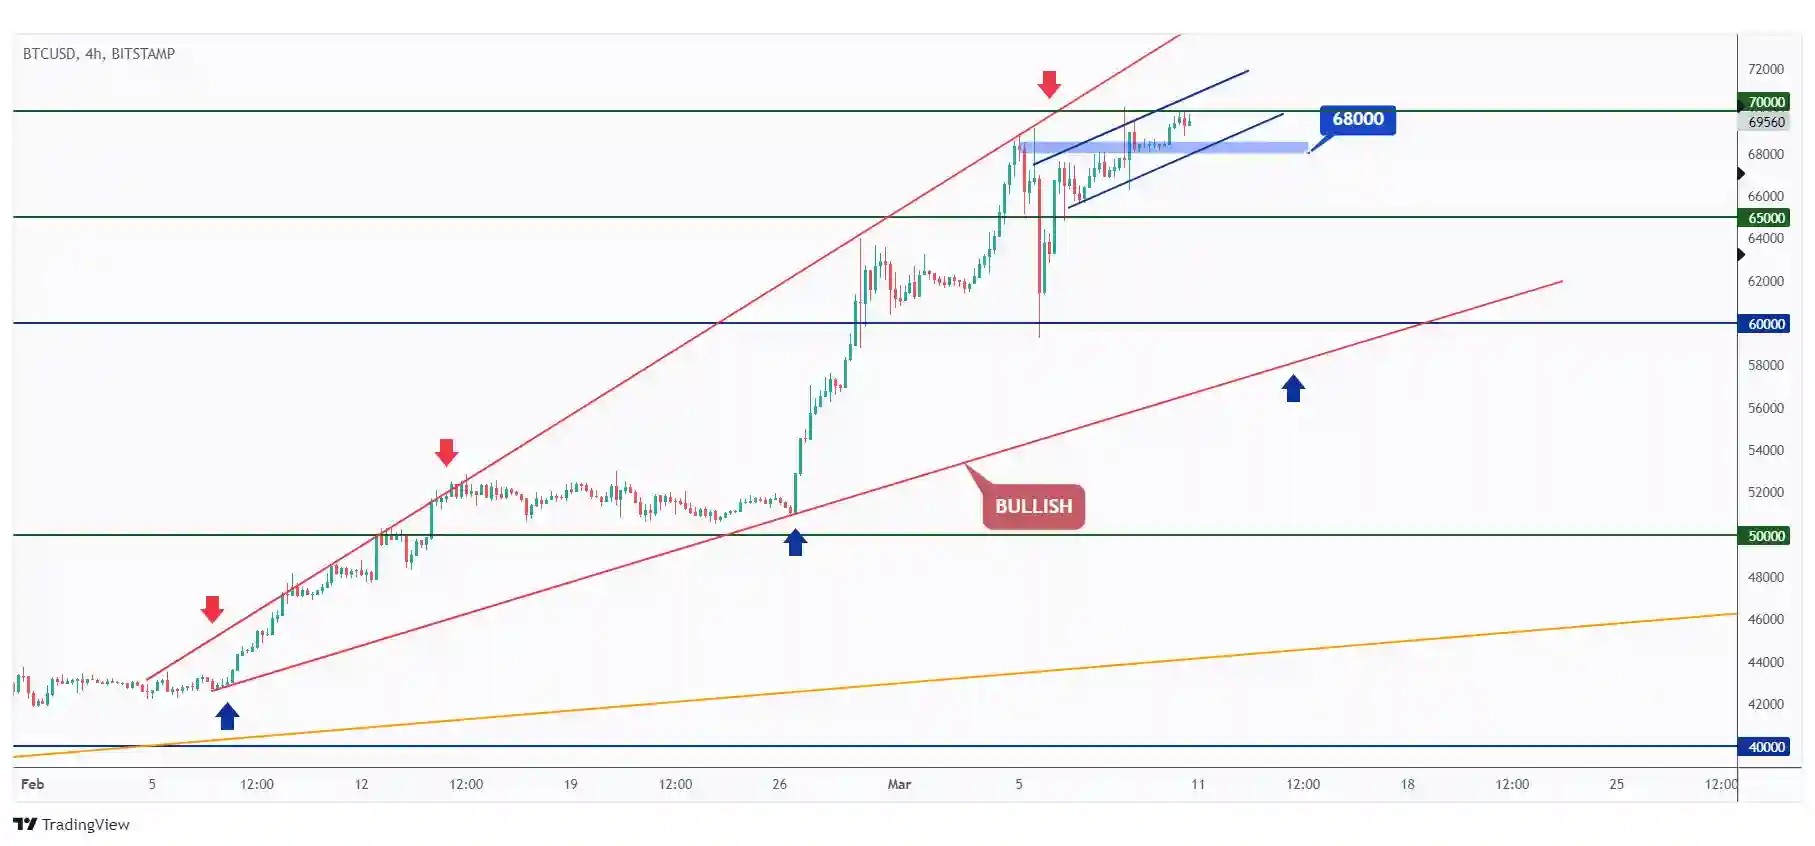 BTC 4h chart overall bullish unless the $68,000 low is broken downward.